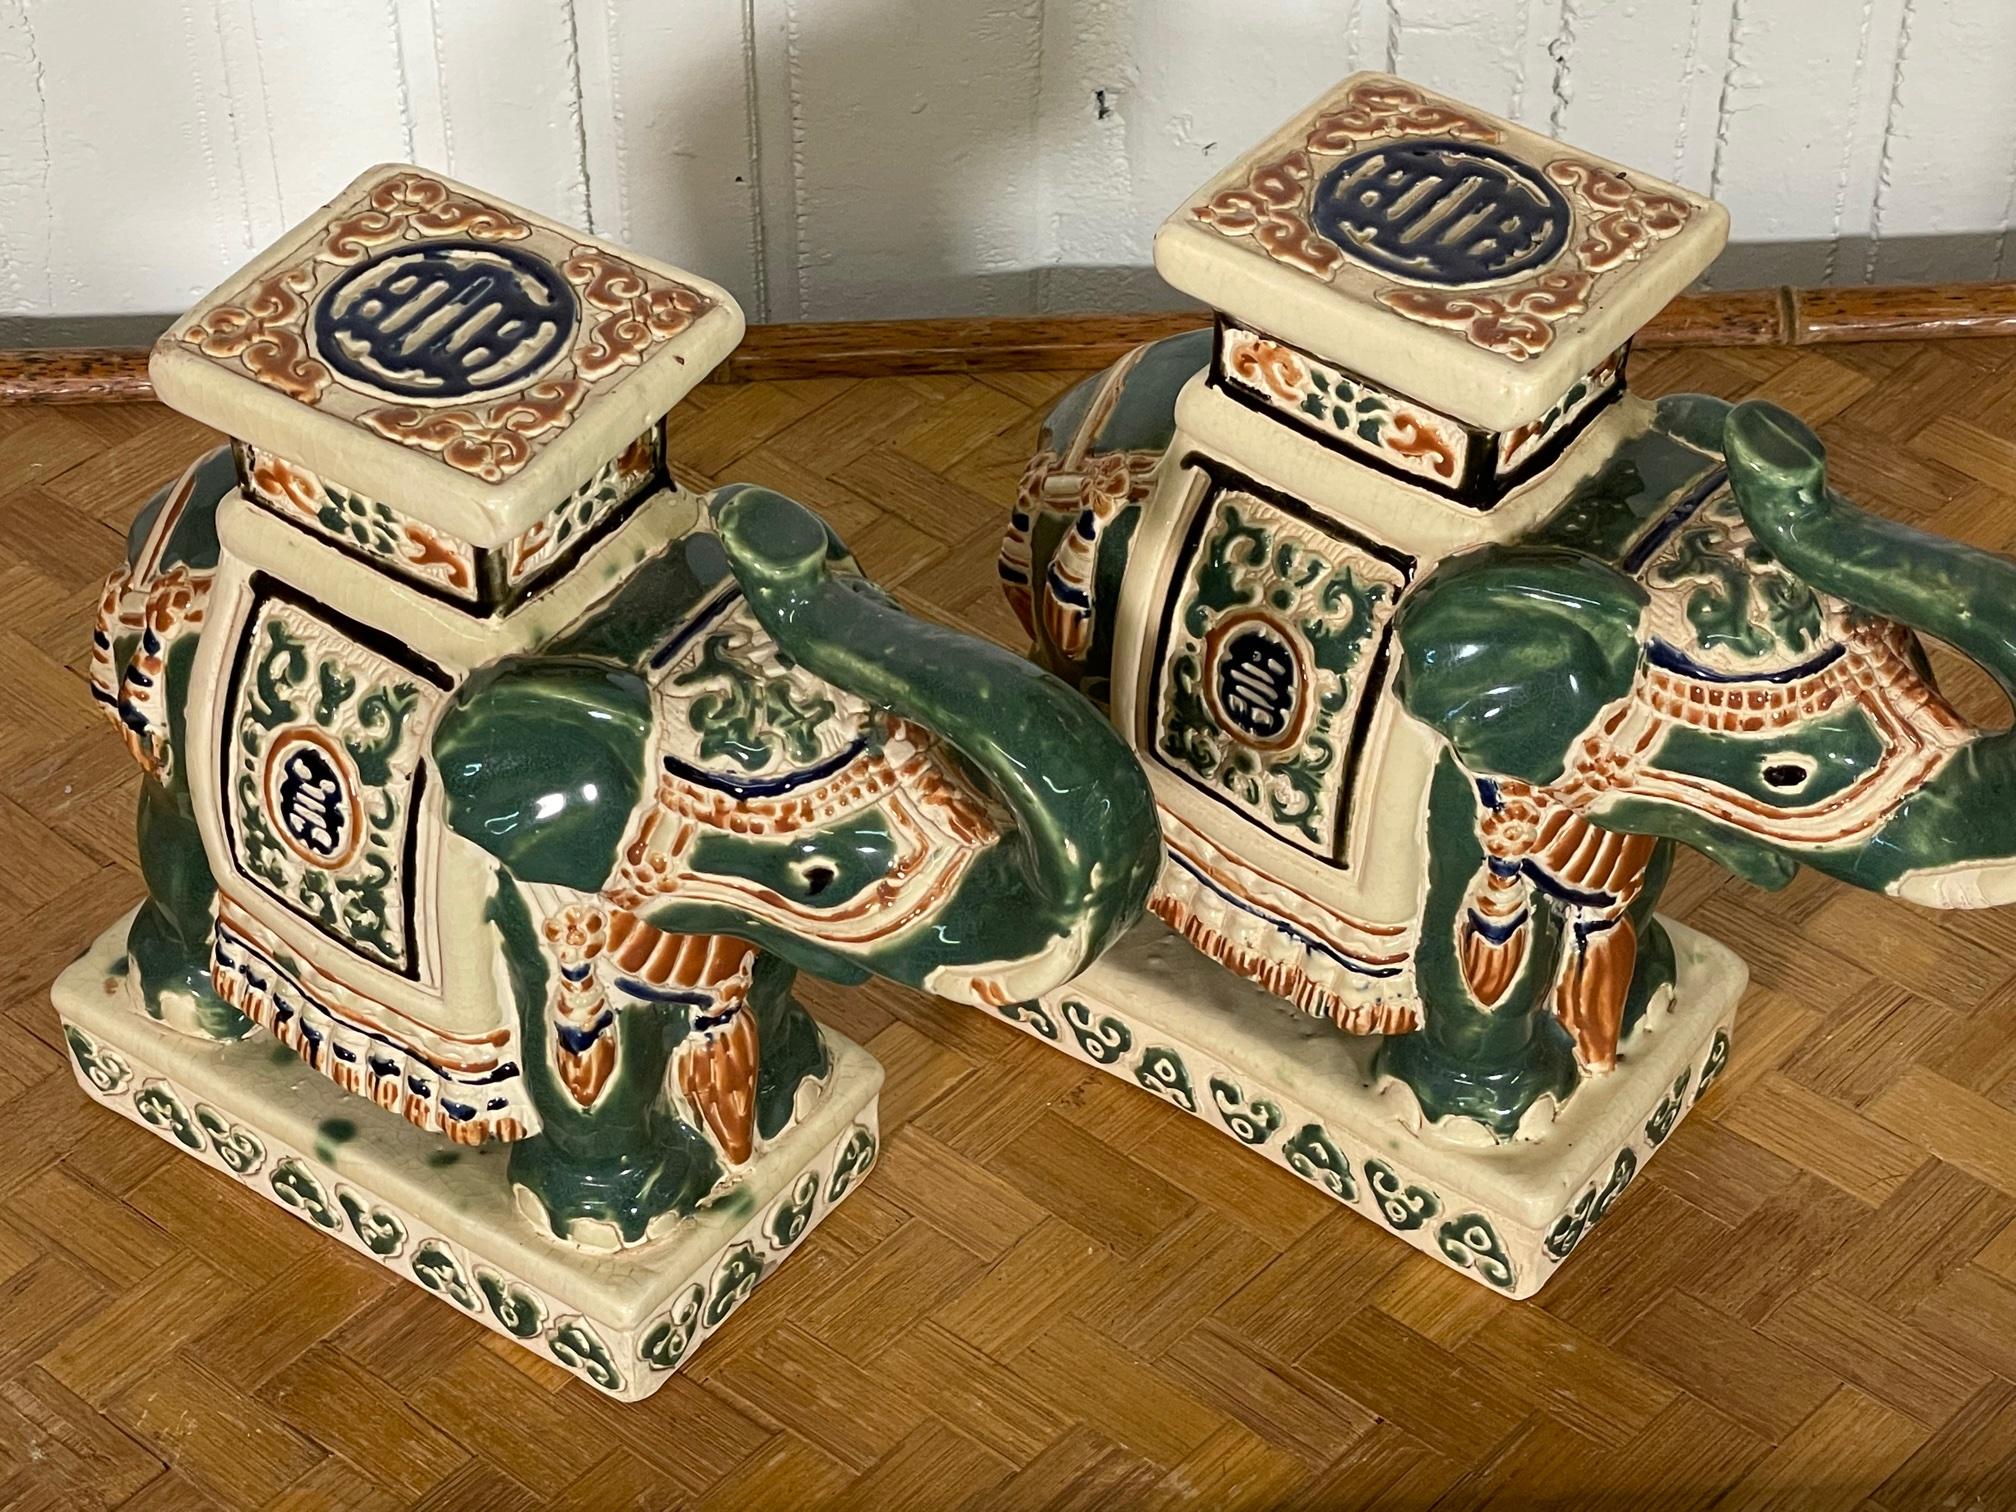 Vintage pair of ceramic elephant footstool bookends. Hand painted and fired in a glossy glaze. Very good condition with only very minor imperfections consistent with age.